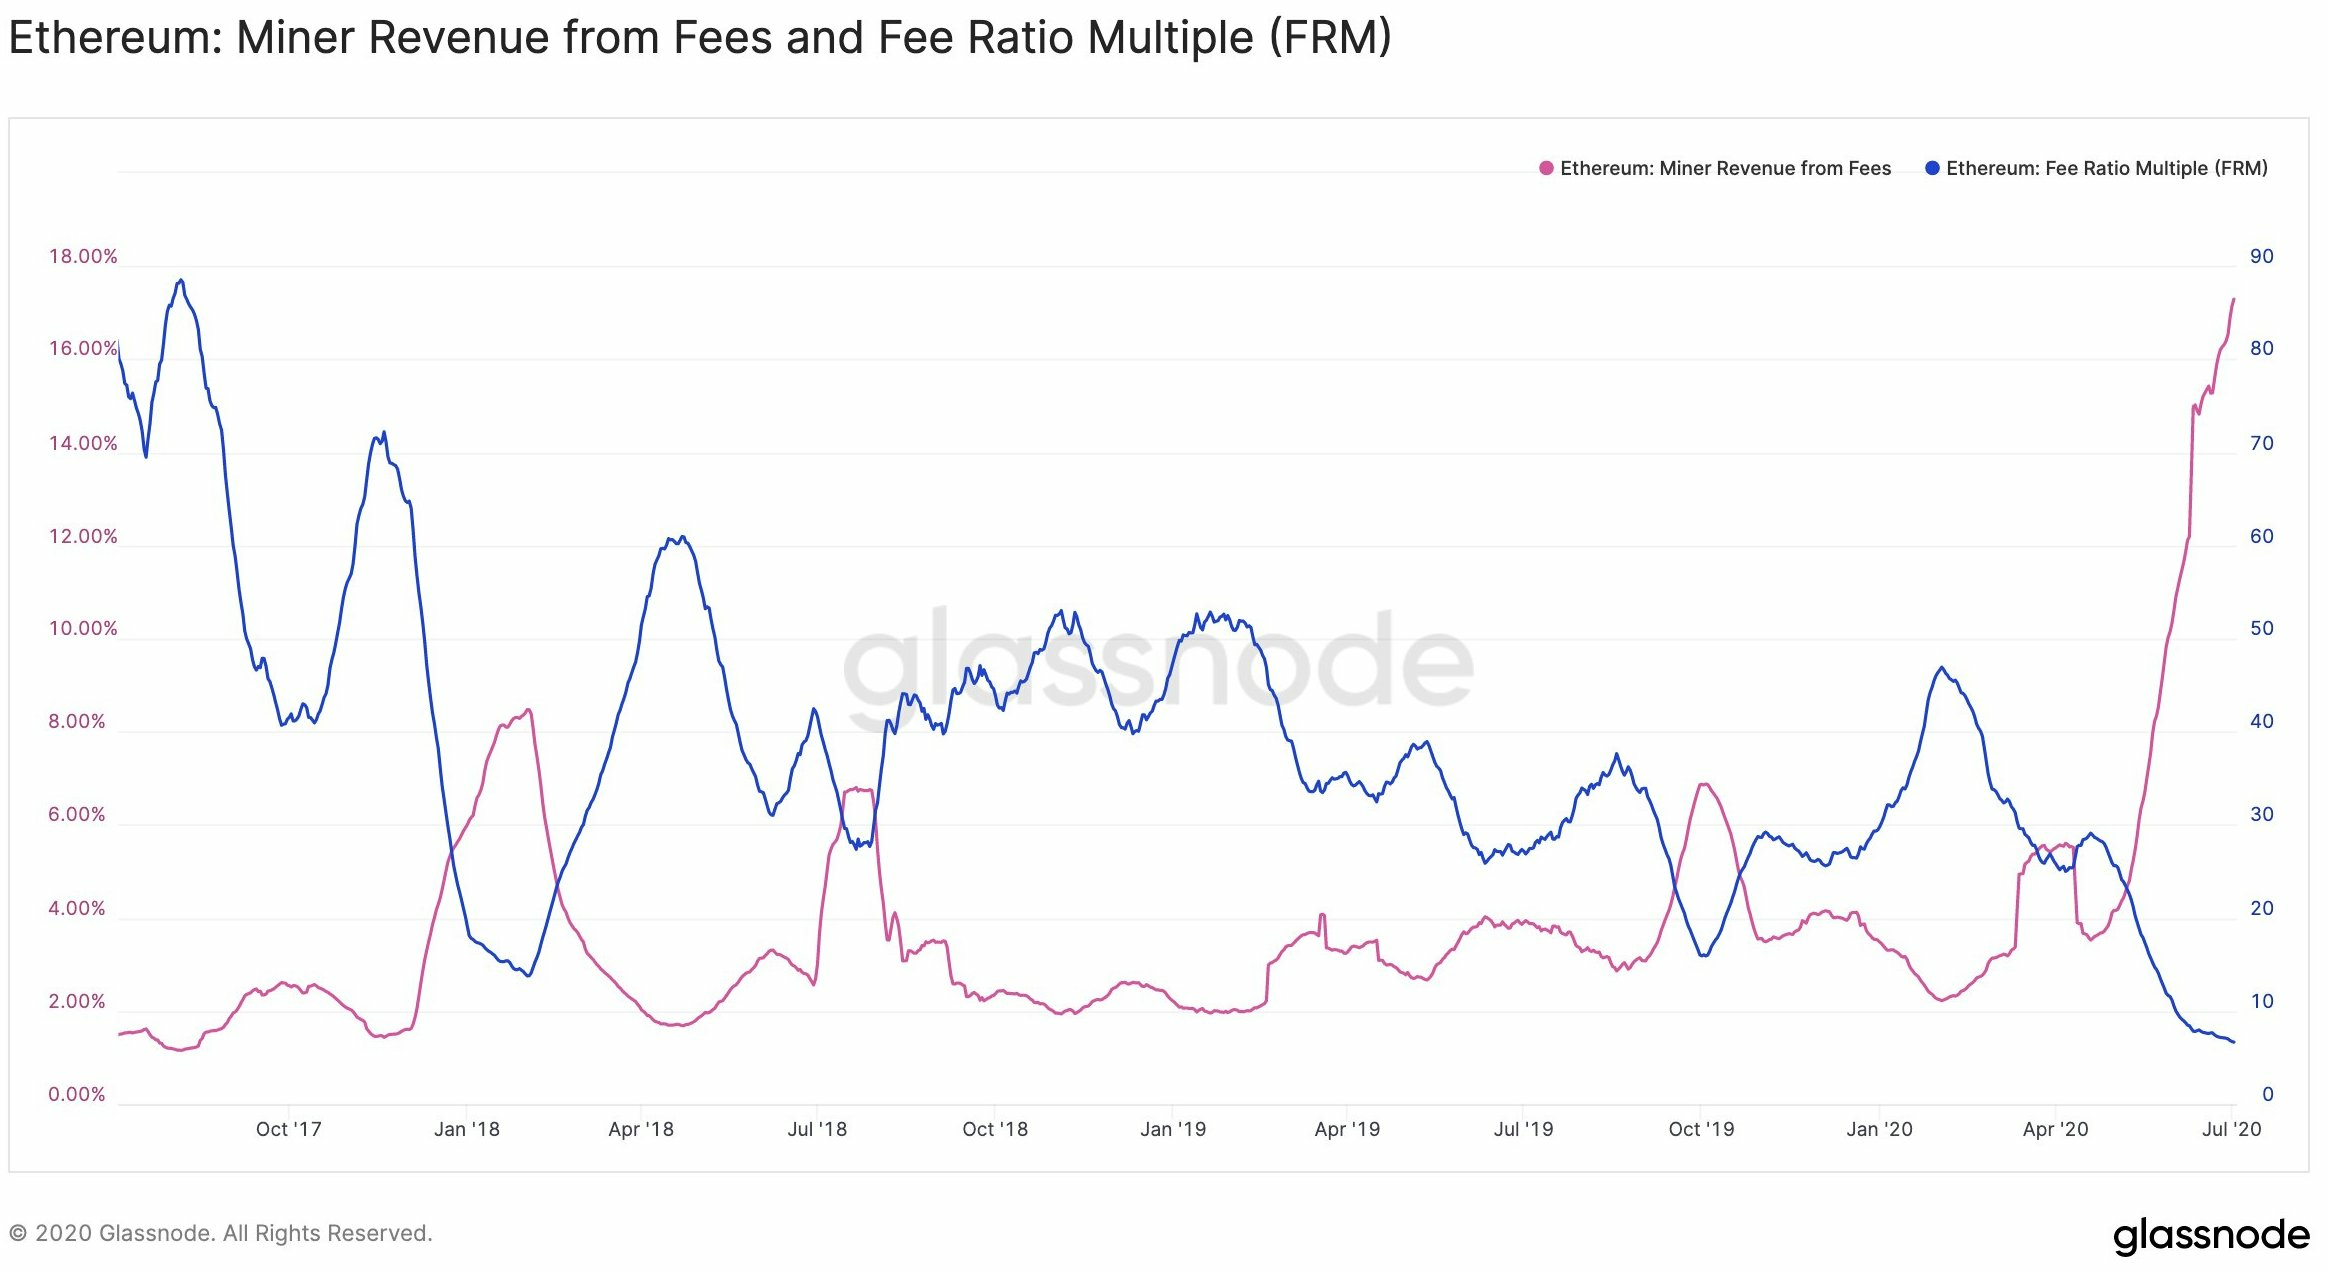 ETH Miner revenue from fees